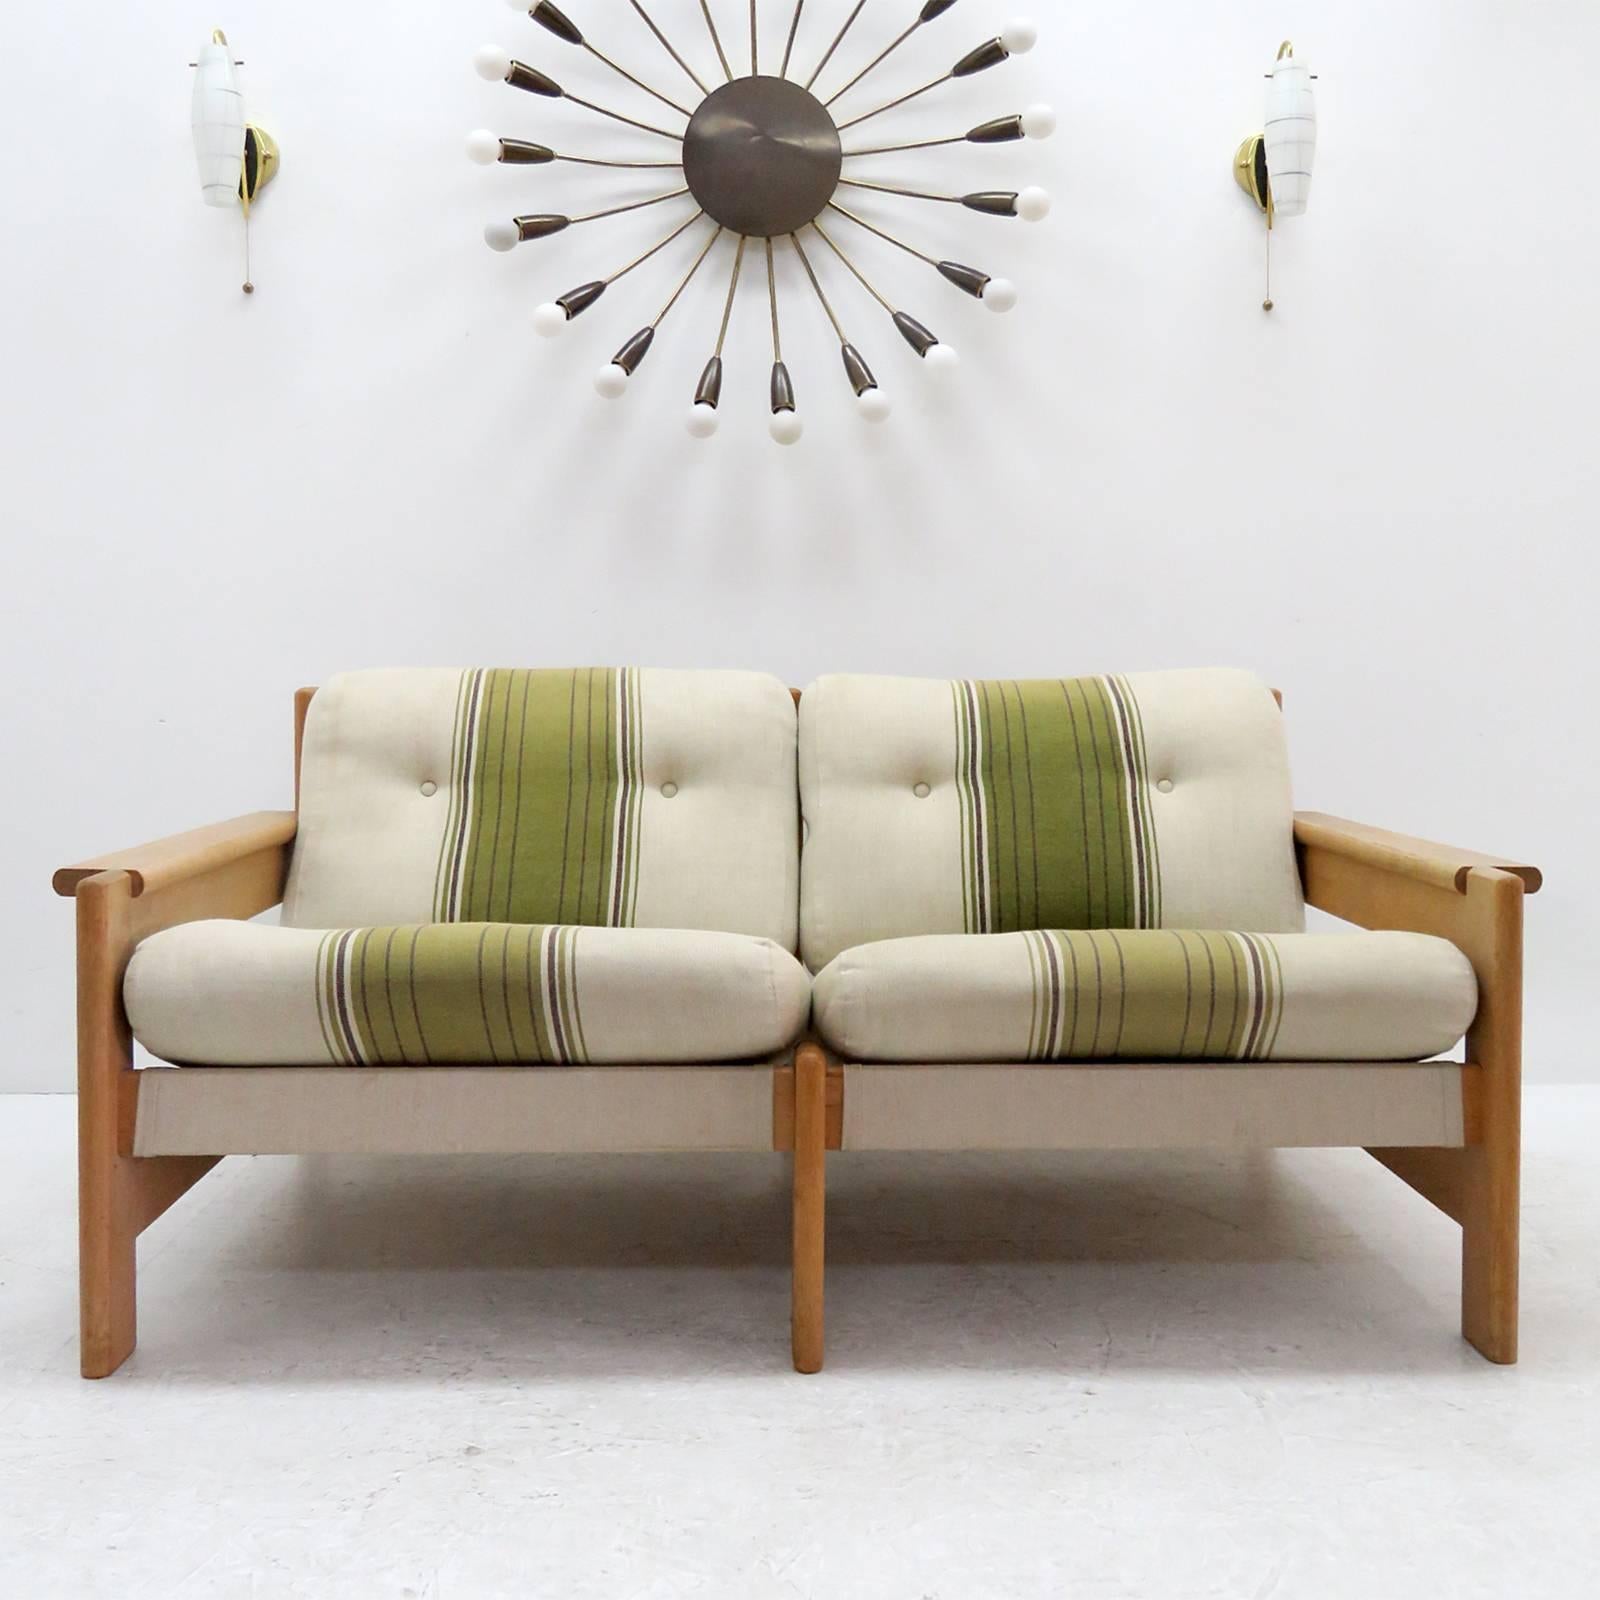 Bold and comfortable Danish modern two-seat sofa by Bernt Petersen, Denmark, 1970, oversized oak frame with dual colored cushions on canvas with leather straps.